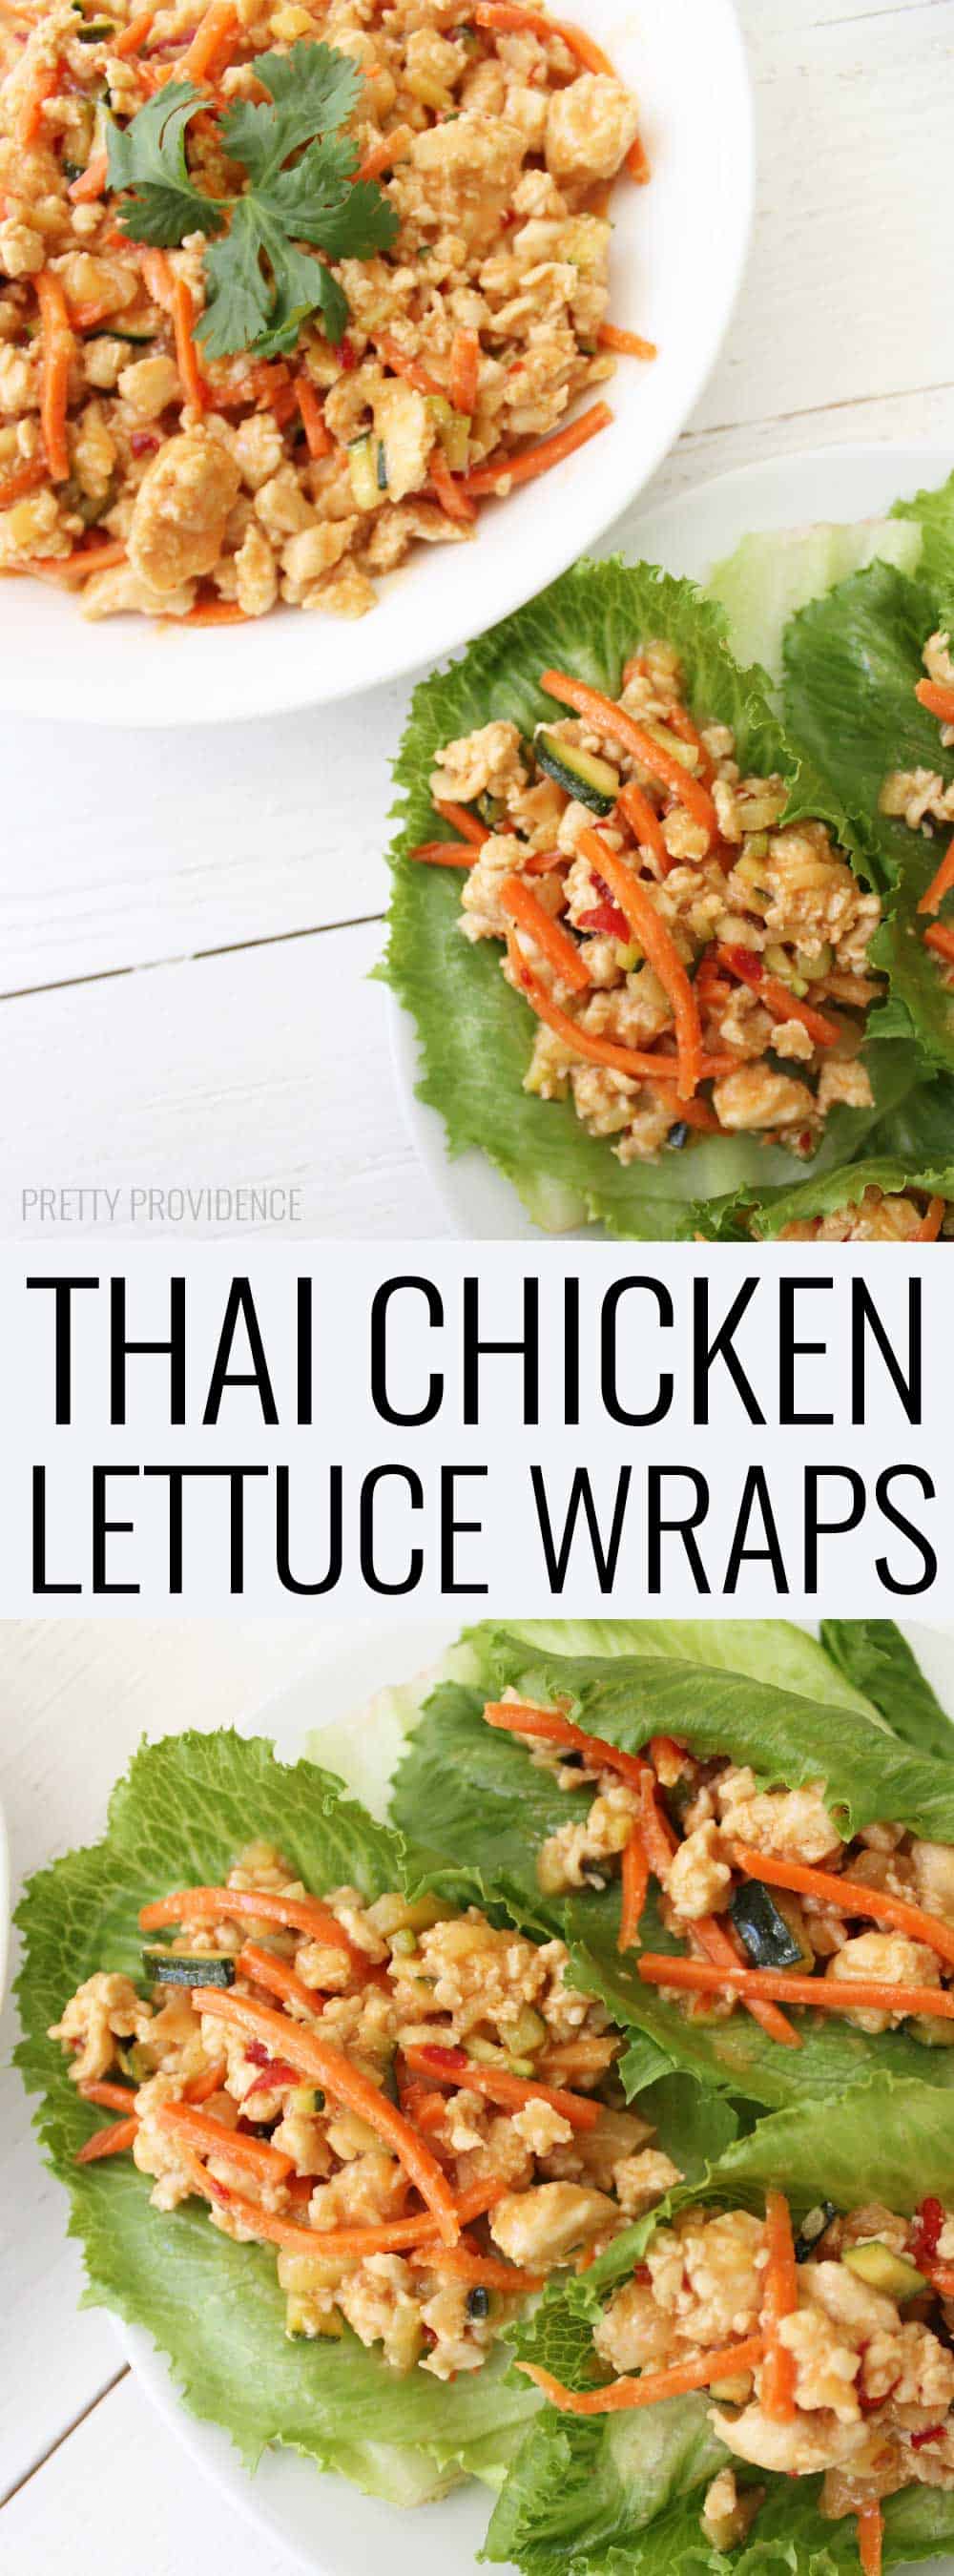 Thai Chicken Lettuce Wraps! These are super low cal, healthy and SO delicious! Perfect for busy nights or meal prepping for lunches throughout the week!